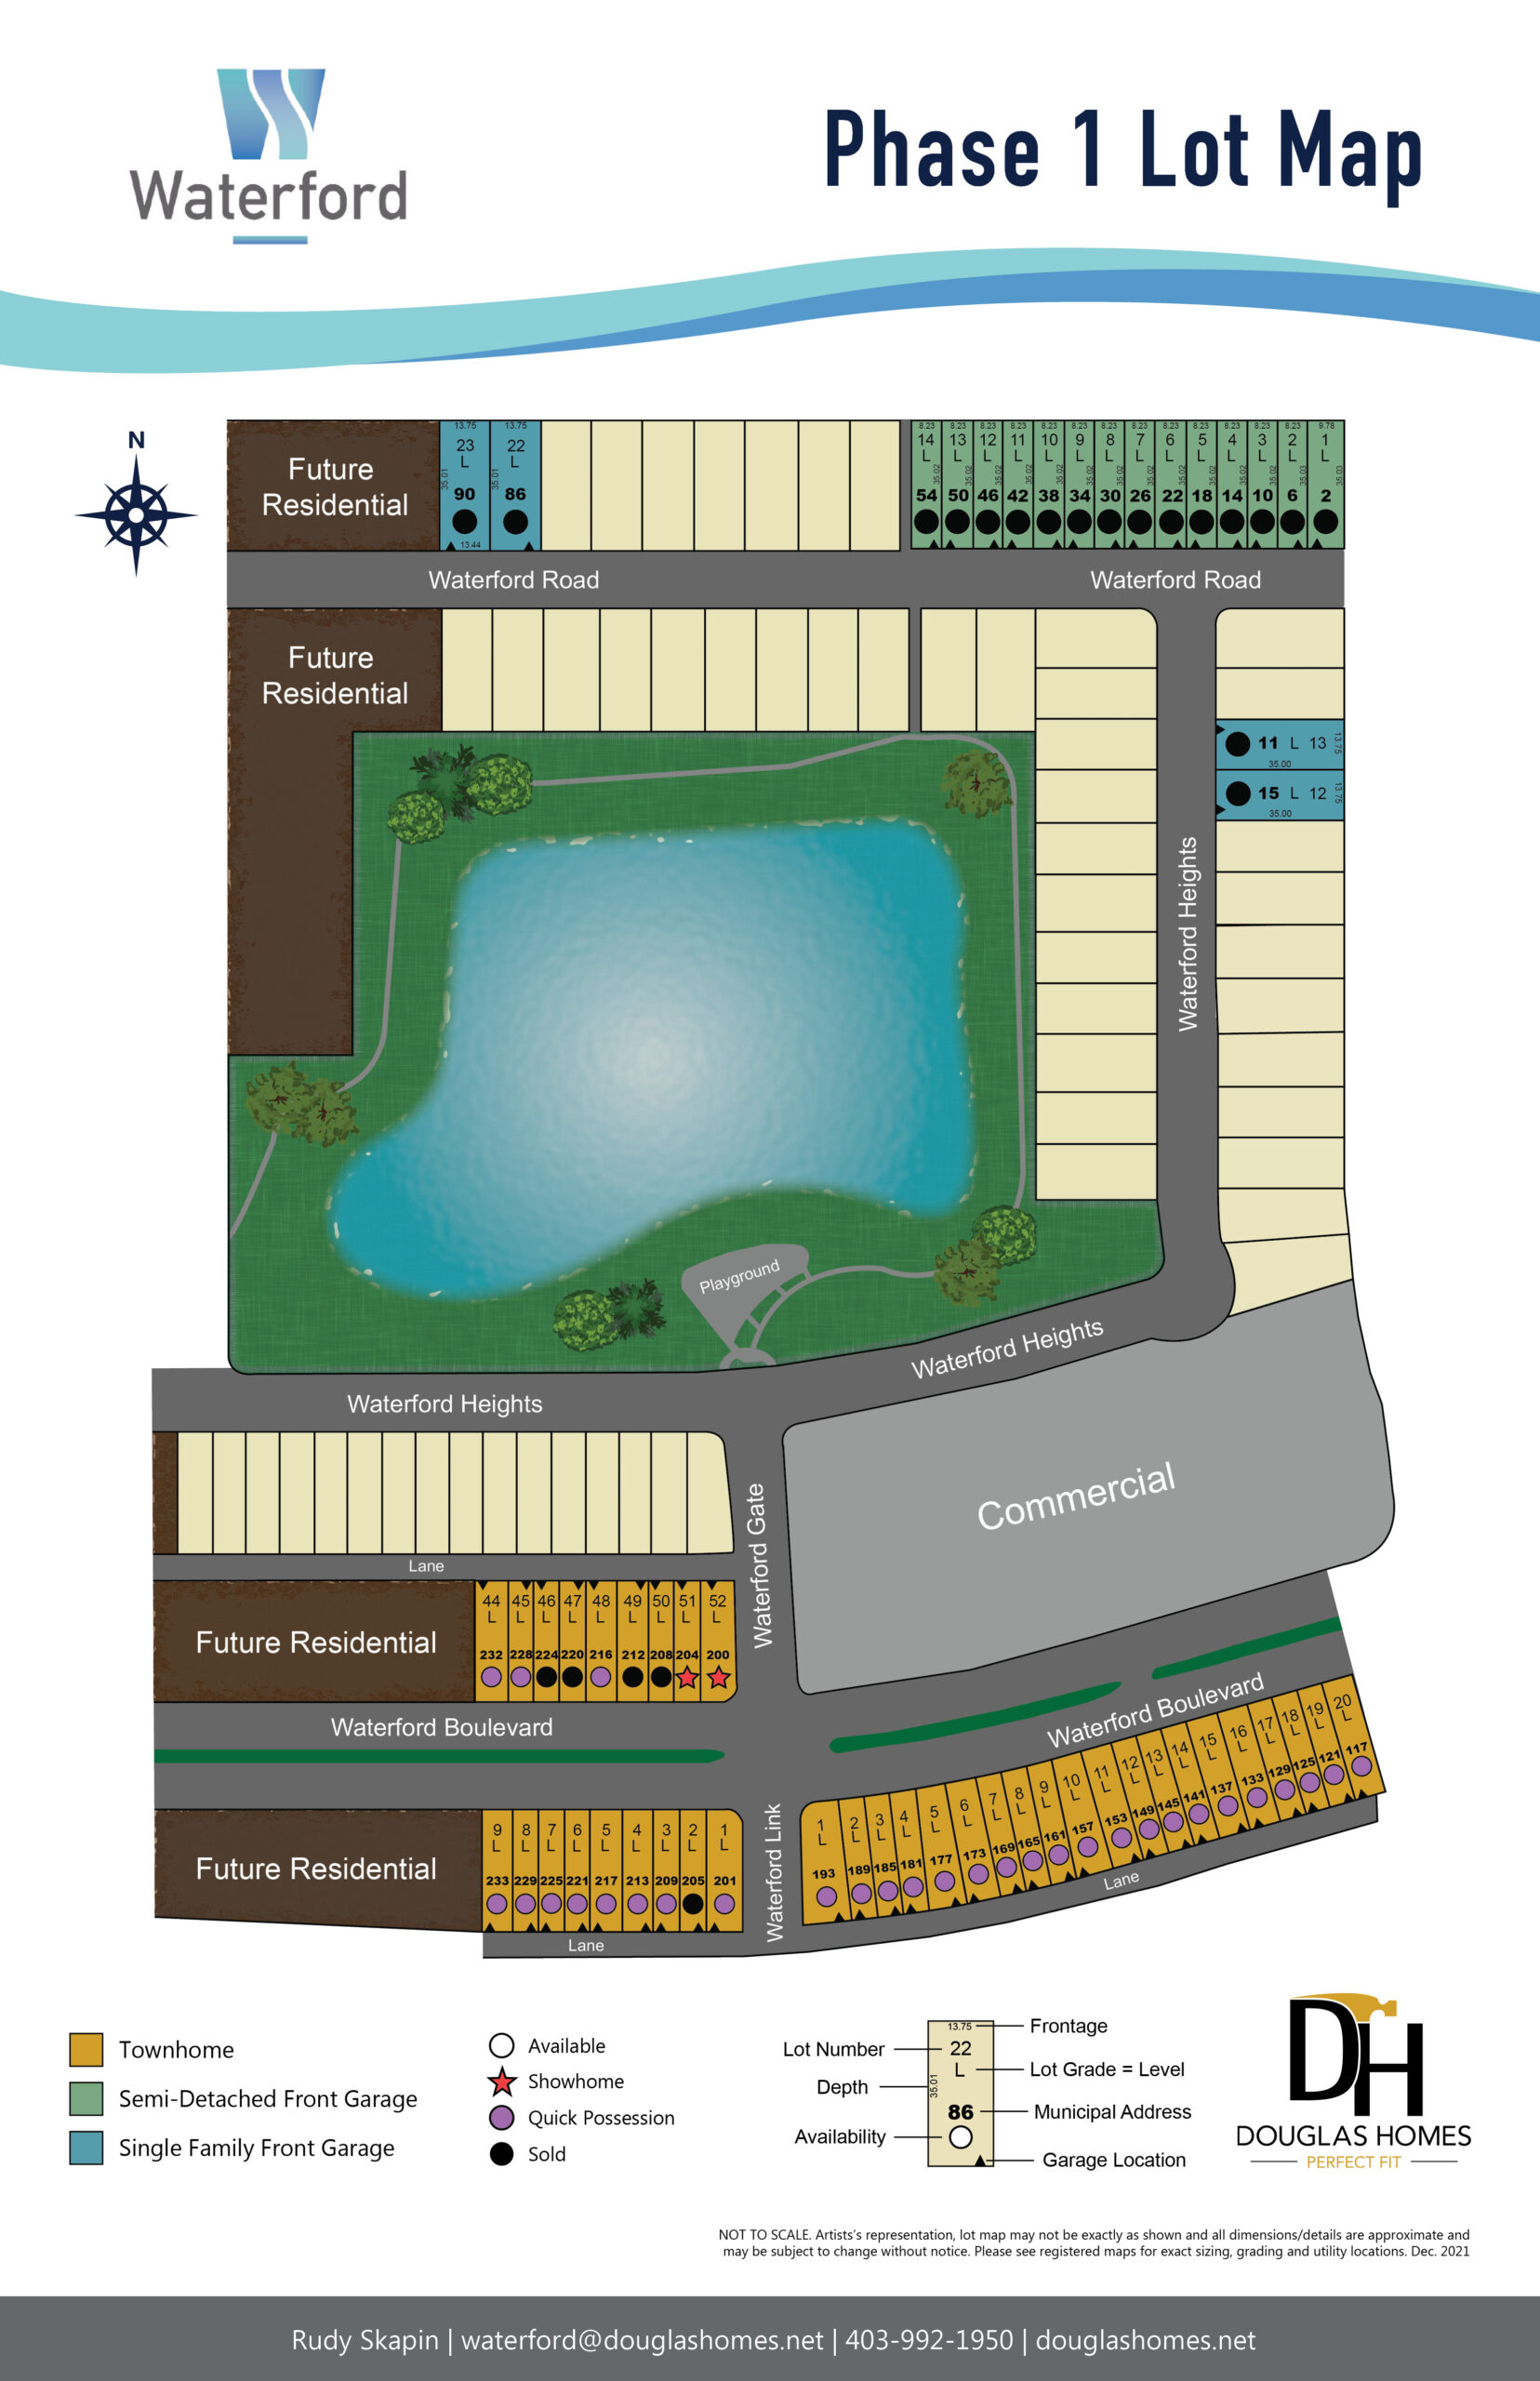 Waterford Lot Map